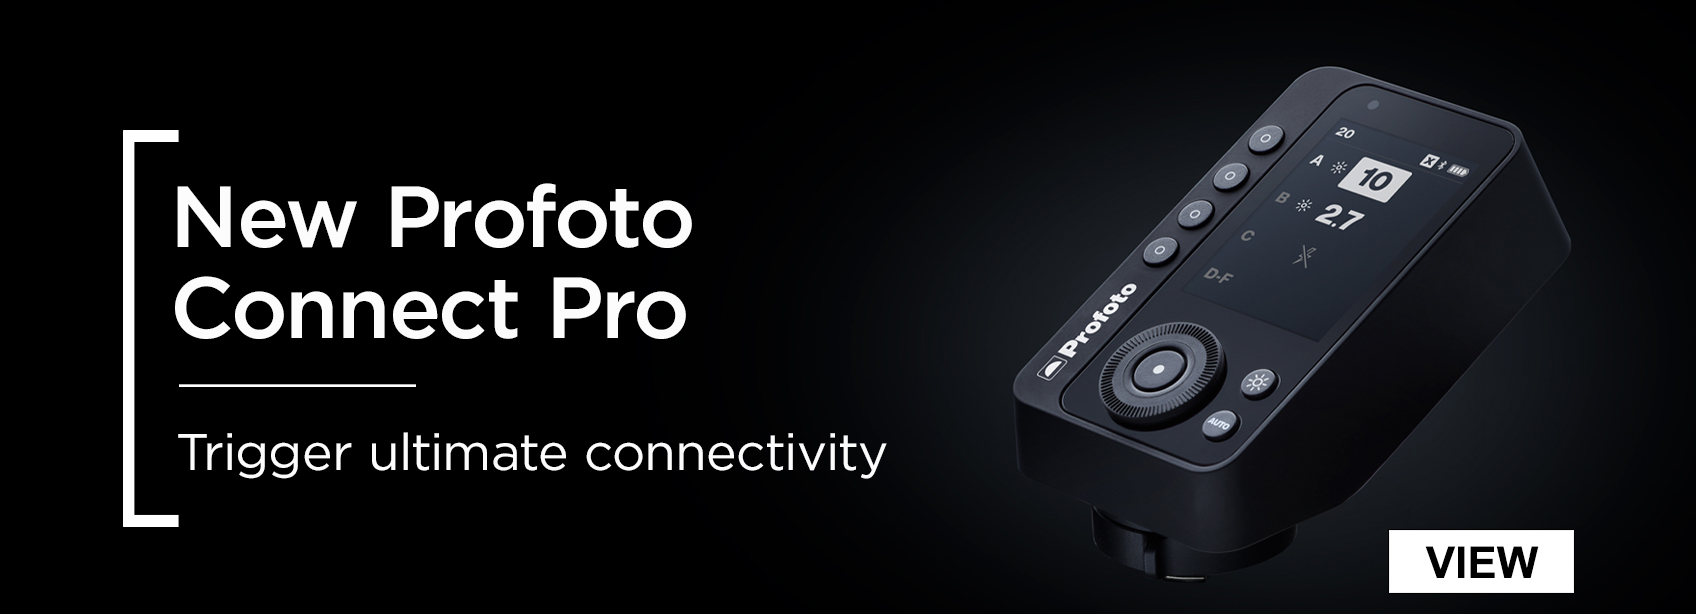 Profoto Connect Plus: Launching today